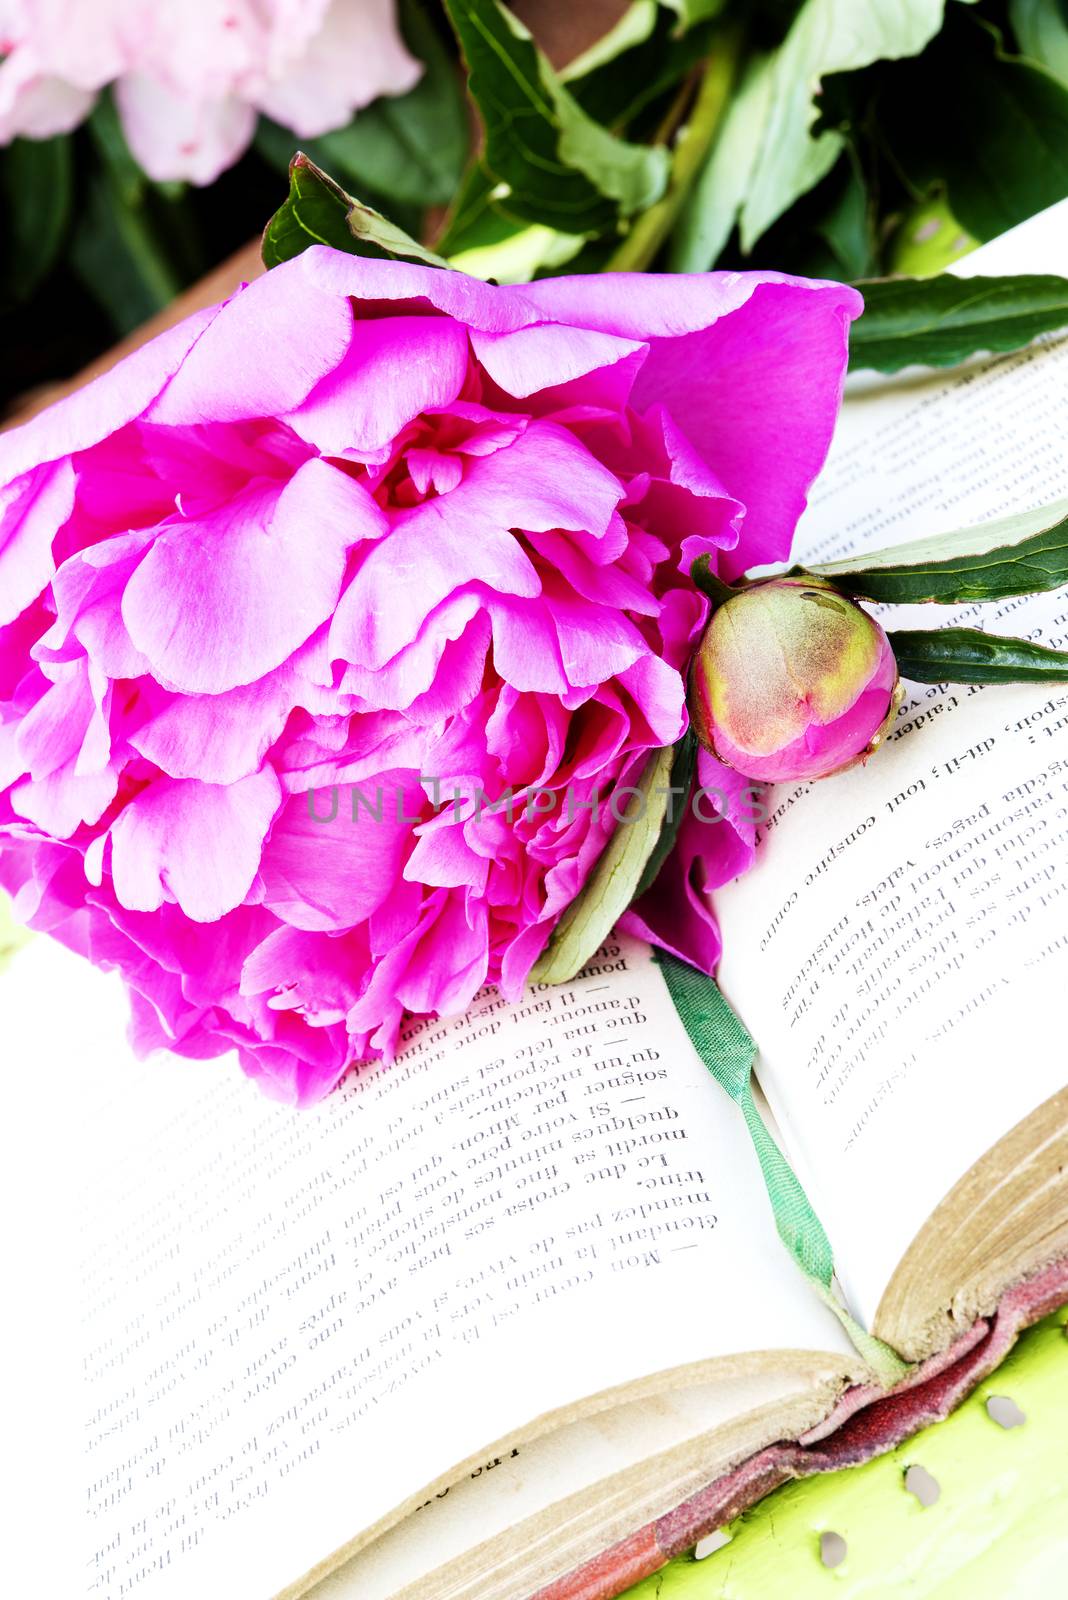 Romantic pink peonies with a old book in the garden